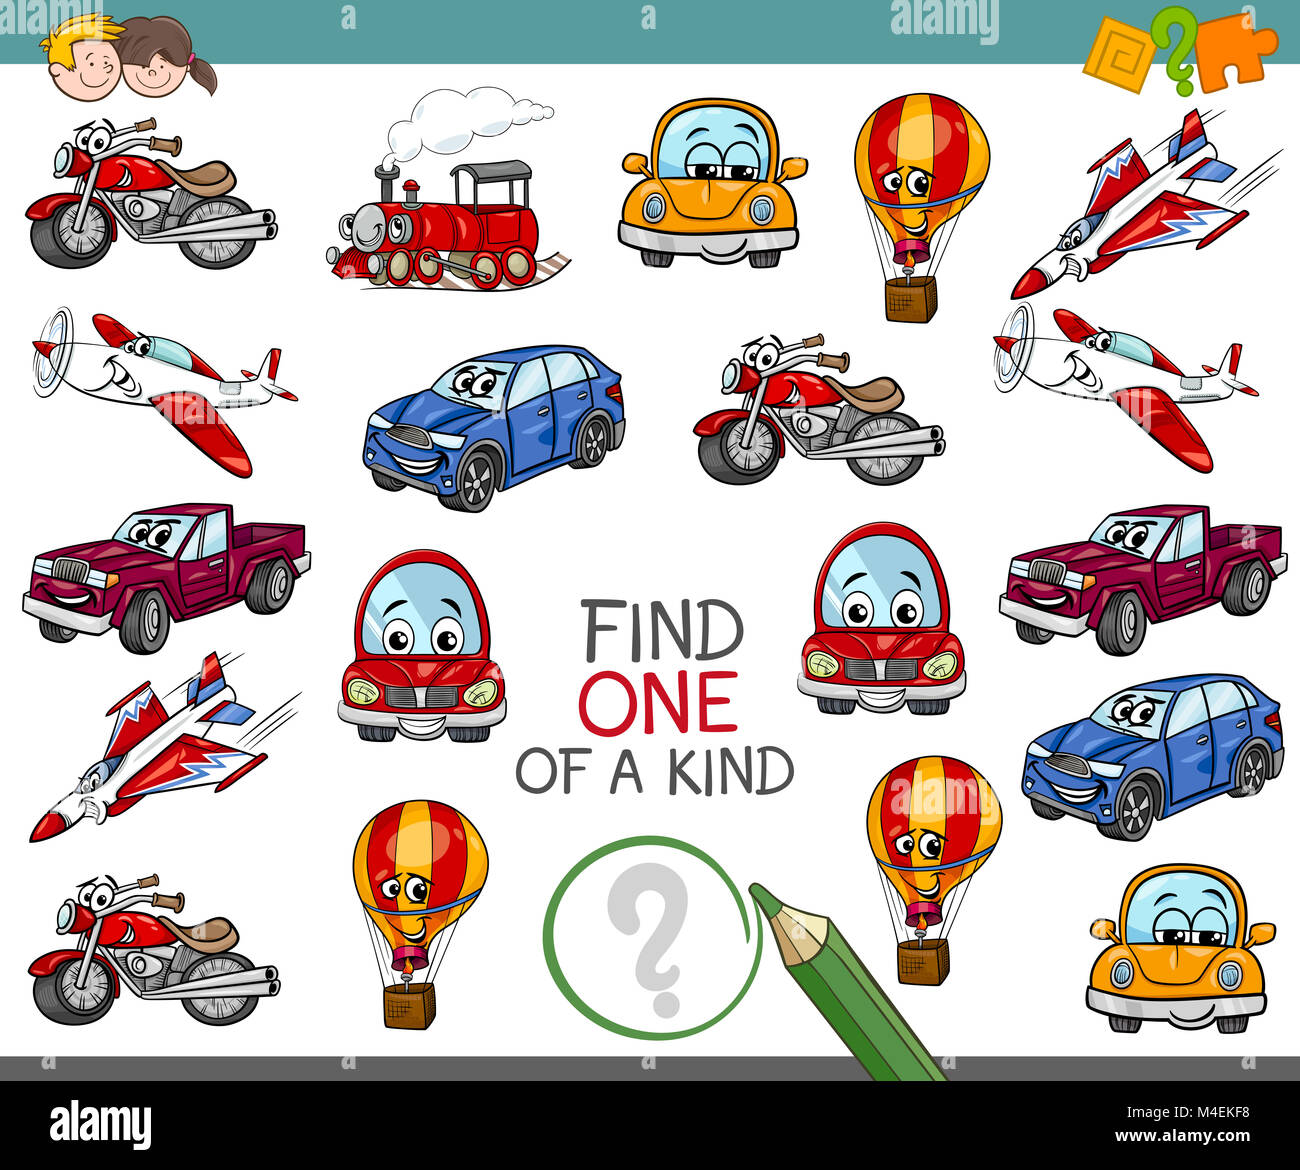 find one of a kind activity Stock Photo